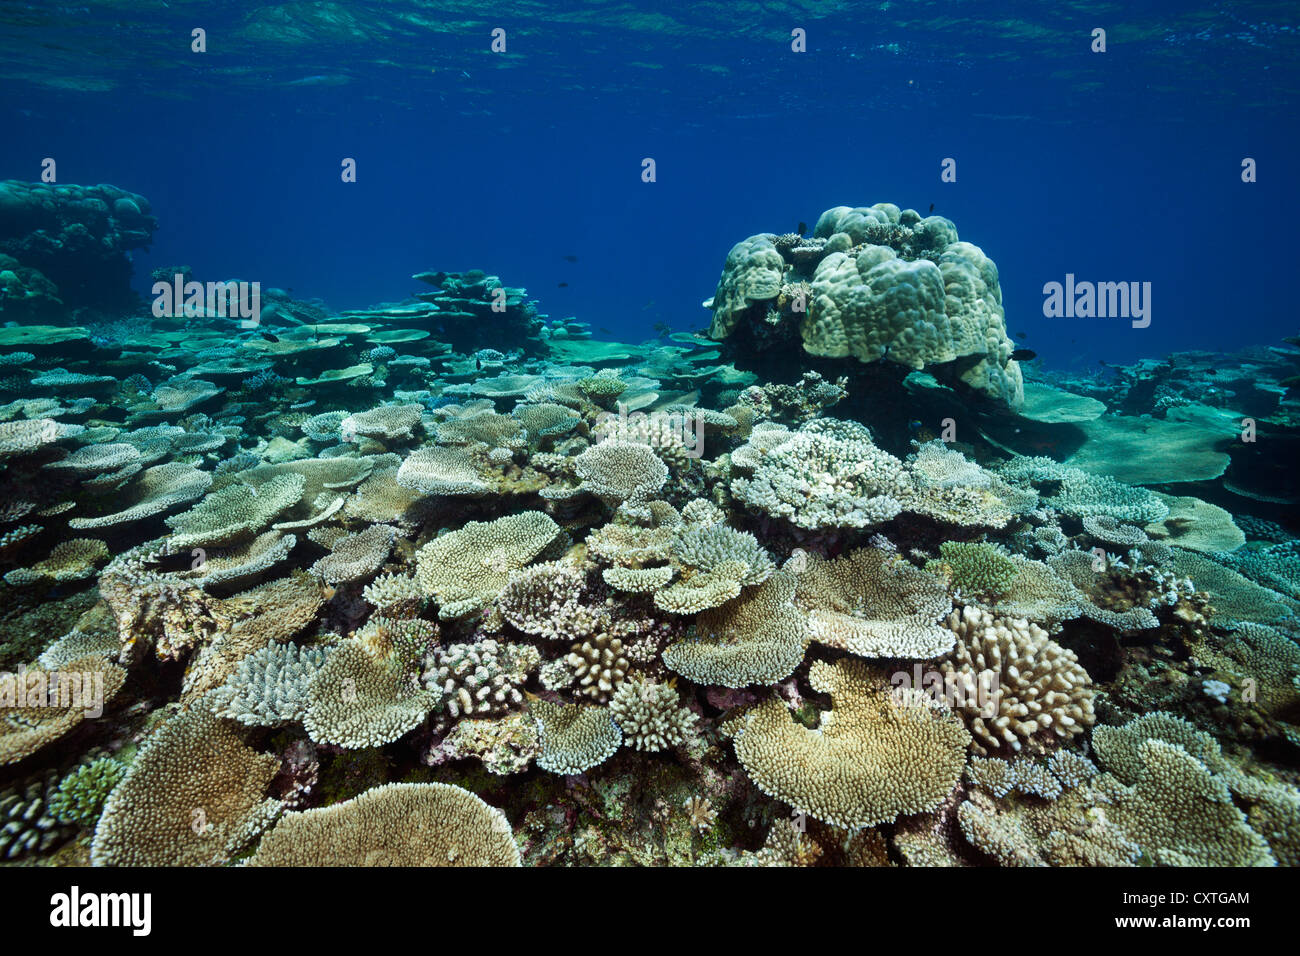 Table Corals growing at Reef, Acropora sp., Thaa Atoll, Maldives Stock Photo